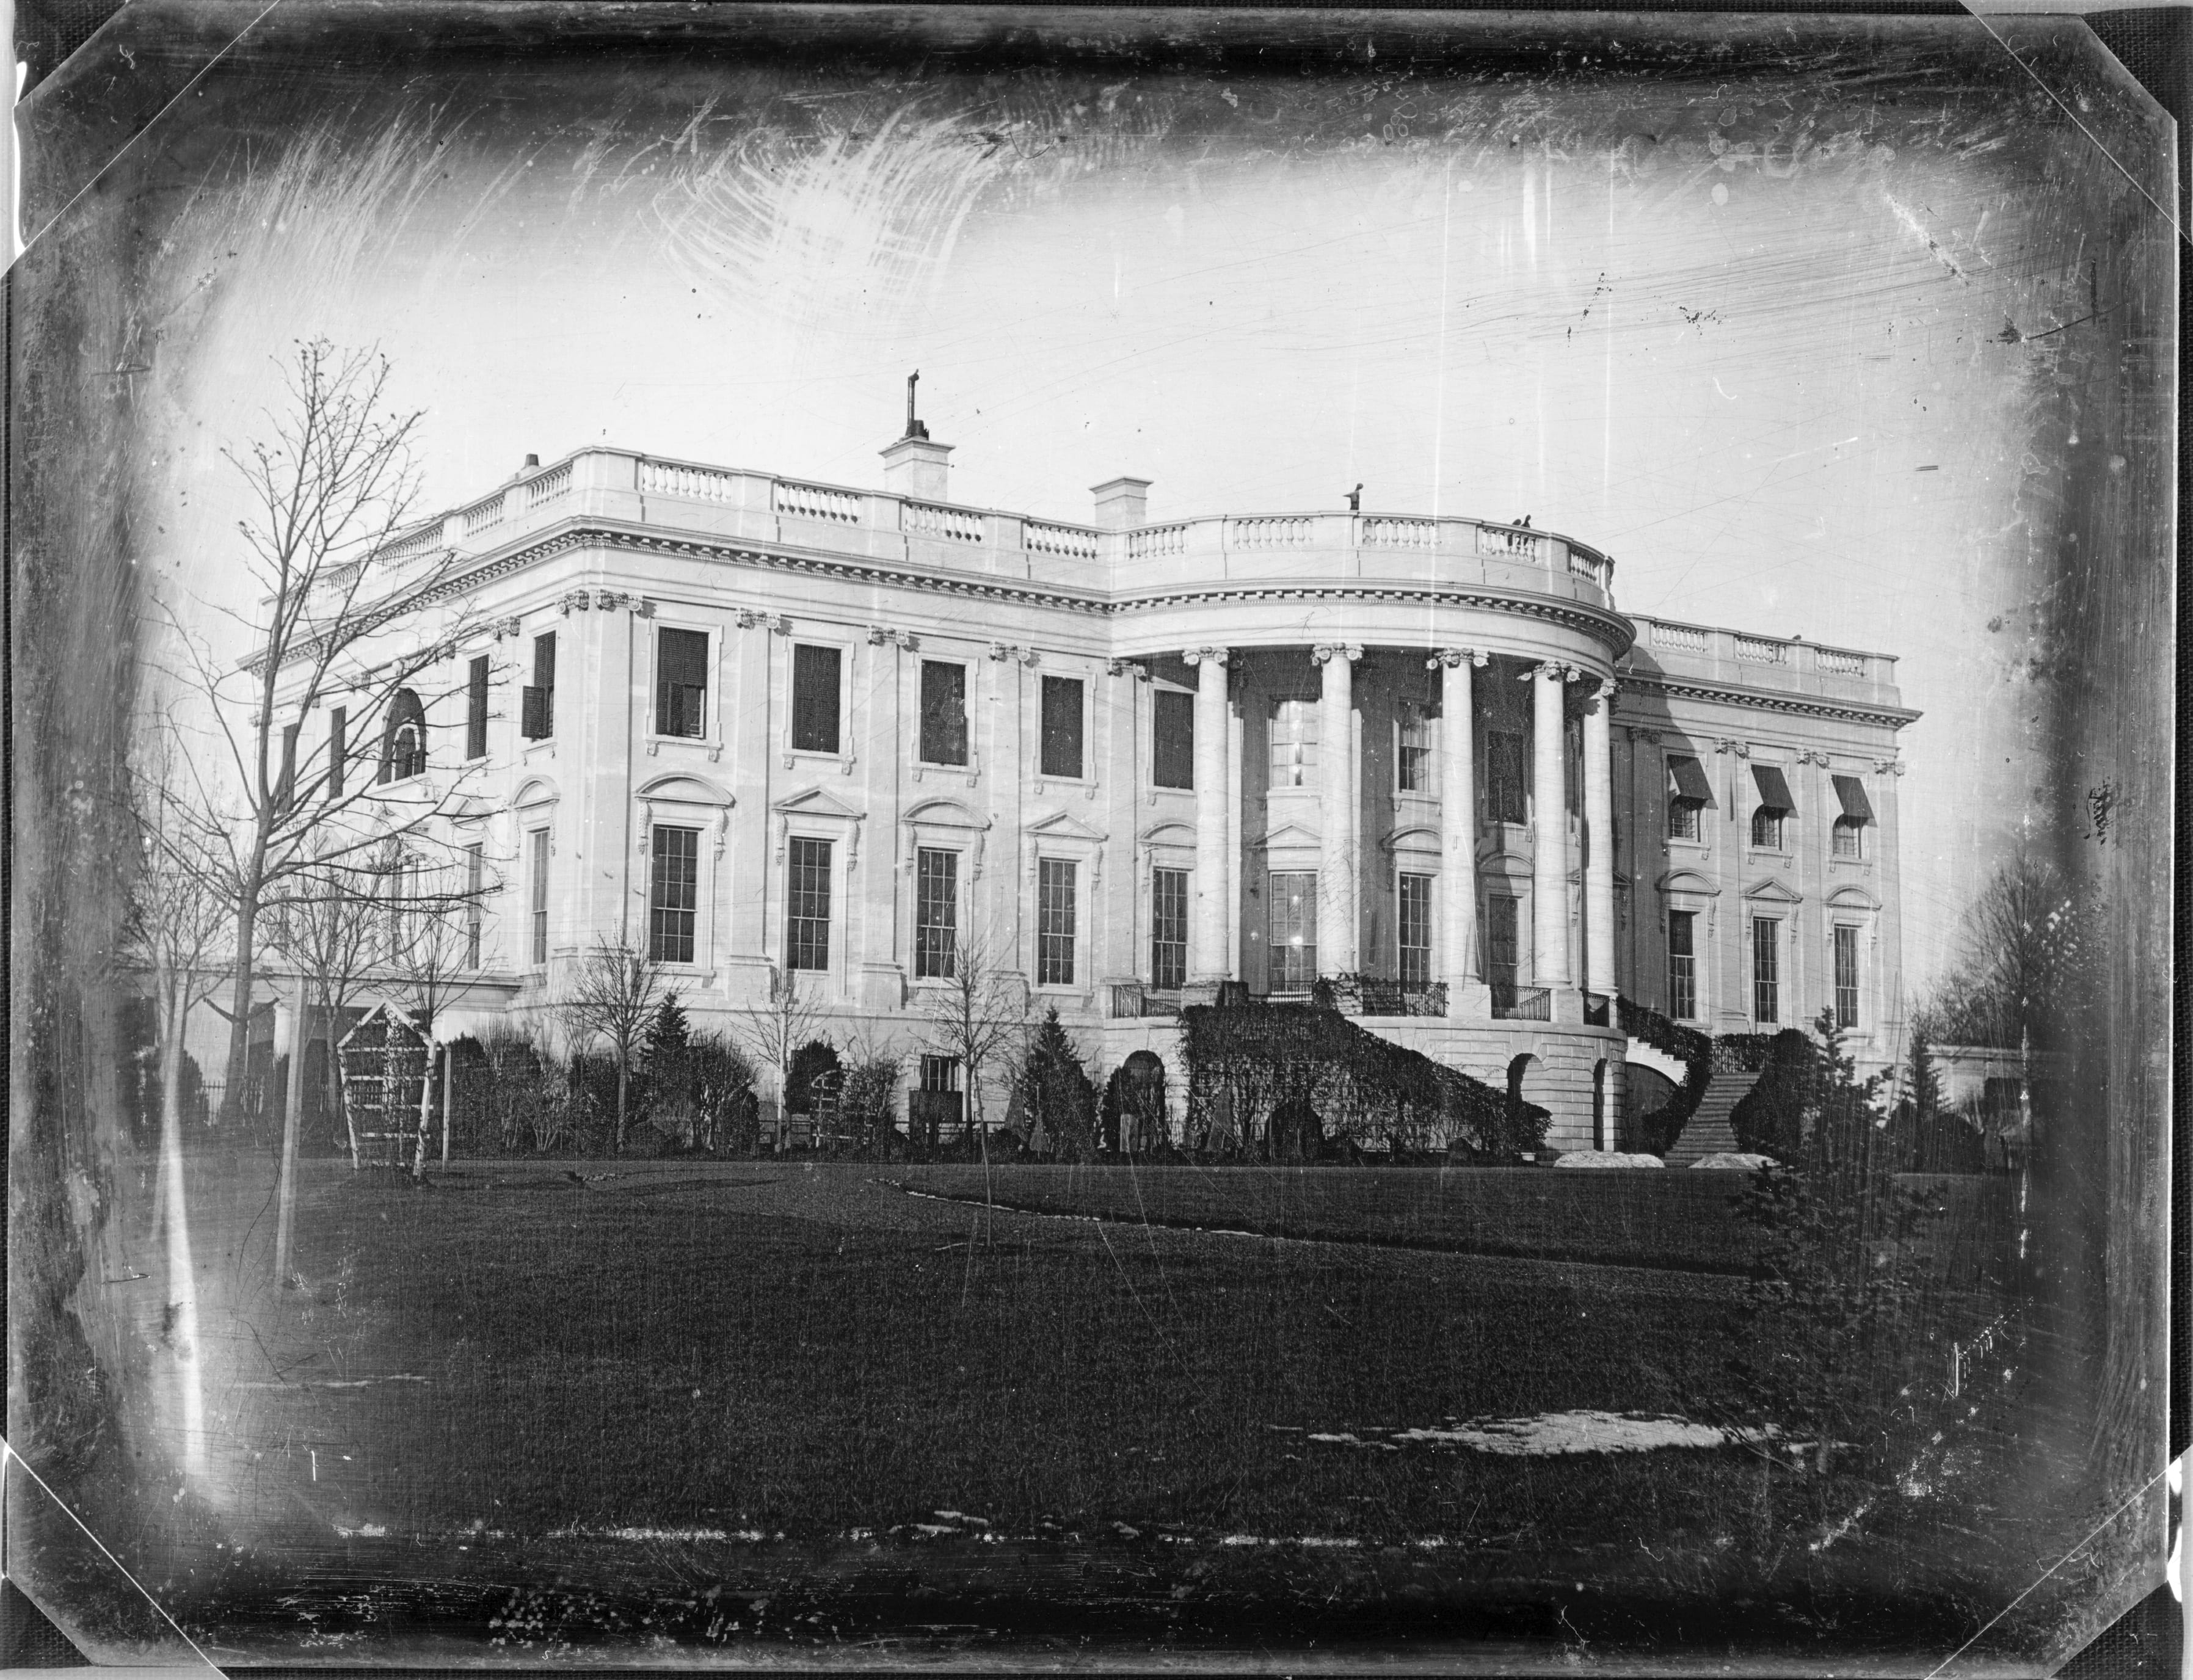 White House daguerreotype by John Plumbe, Jr. in 1846 (Library of Congress) 